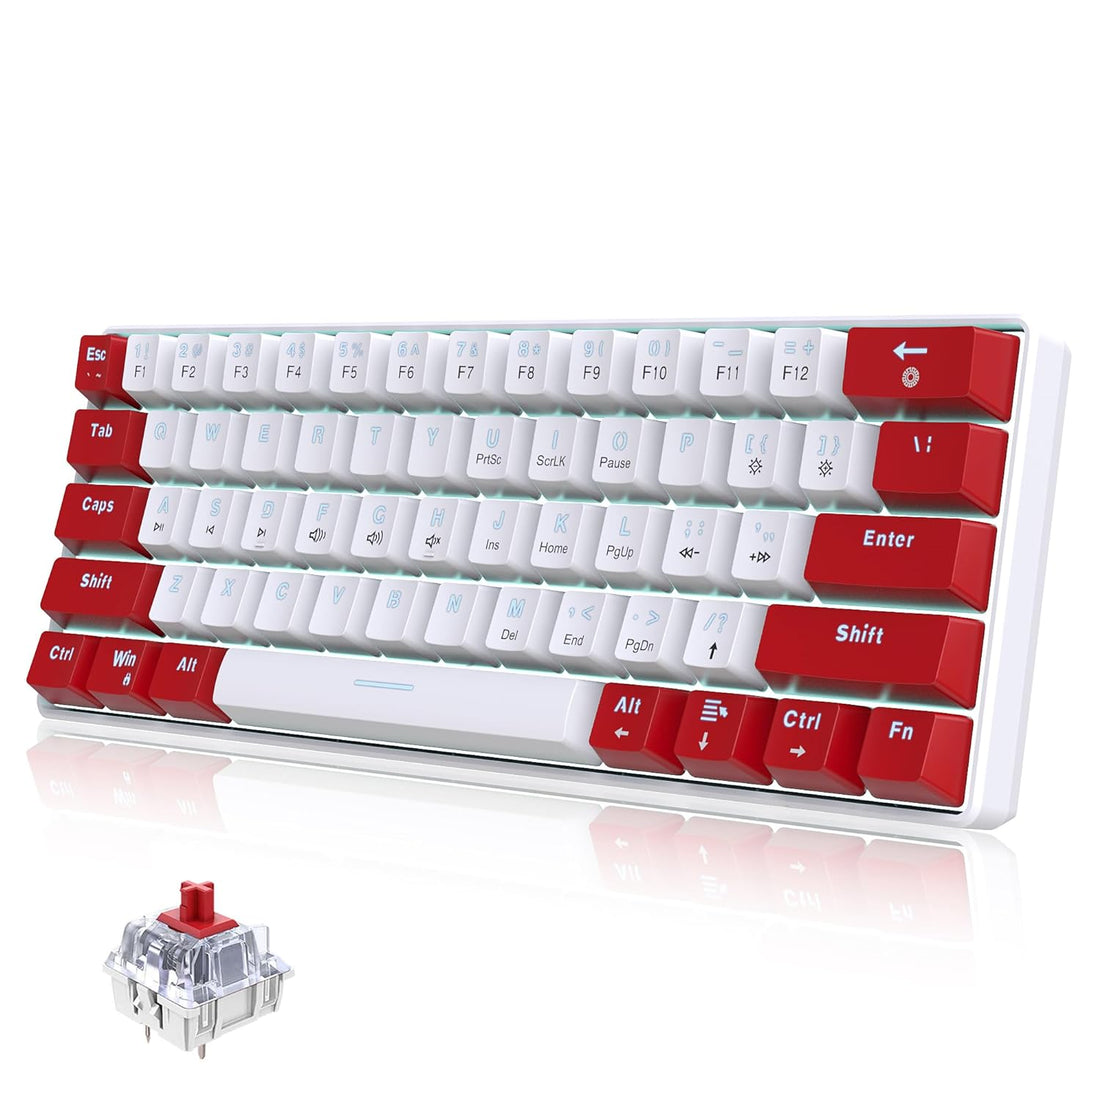 Snpurdiri Wired 60% Mechanical Gaming Keyboard, White LED Backlit Ultra-Compact Mini Office Keyboard for Windows Laptop PC Mac (Red-White, Red Switches)